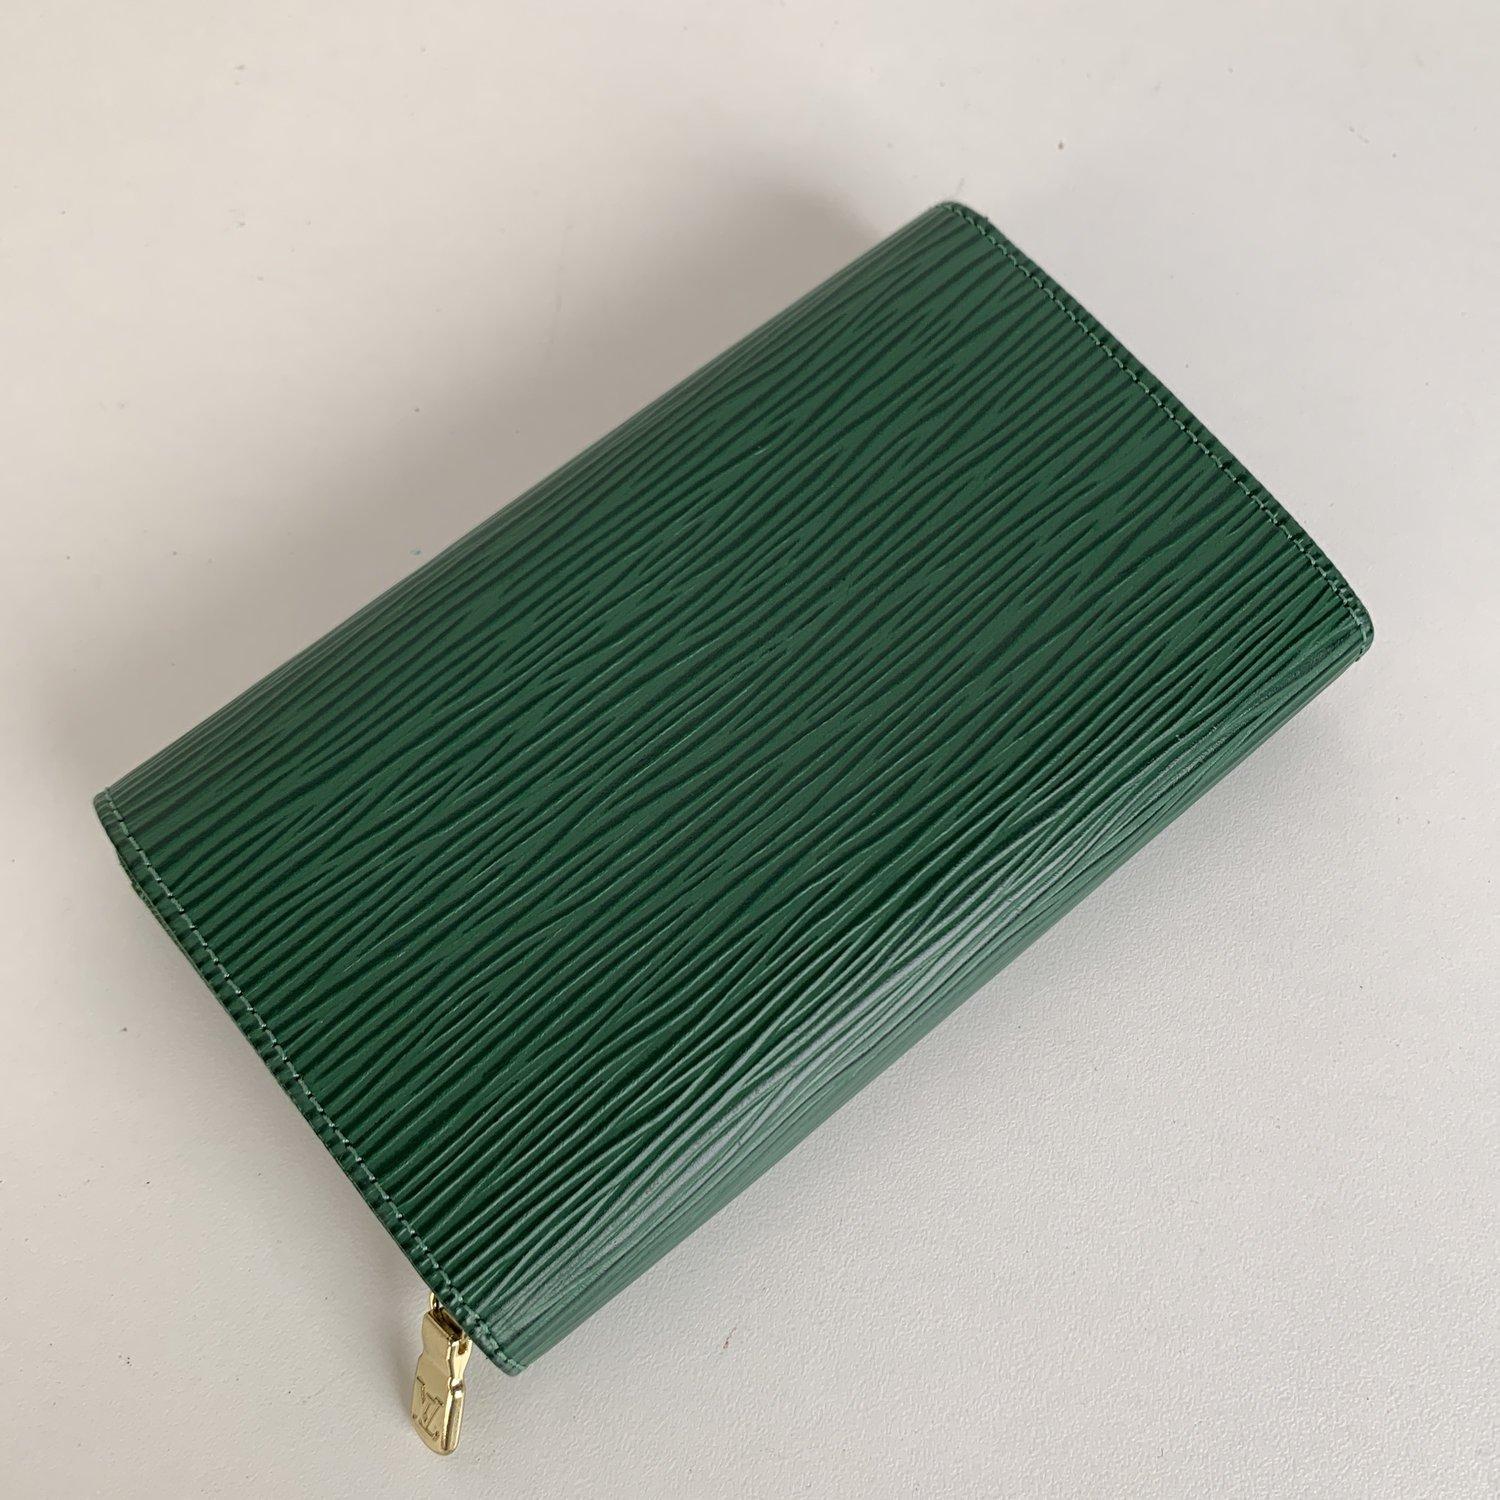 Louis Vuitton Green Epi Leather Porte-Monnaie Tresor Wallet. Snap flap closure. LV - LOUIS VUITTON logo embossed on the flap. 2 open pockets on the reverse of the flap. Leather lining. 2 main compartments inside. 1 middle zip compartment . 'LOUIS